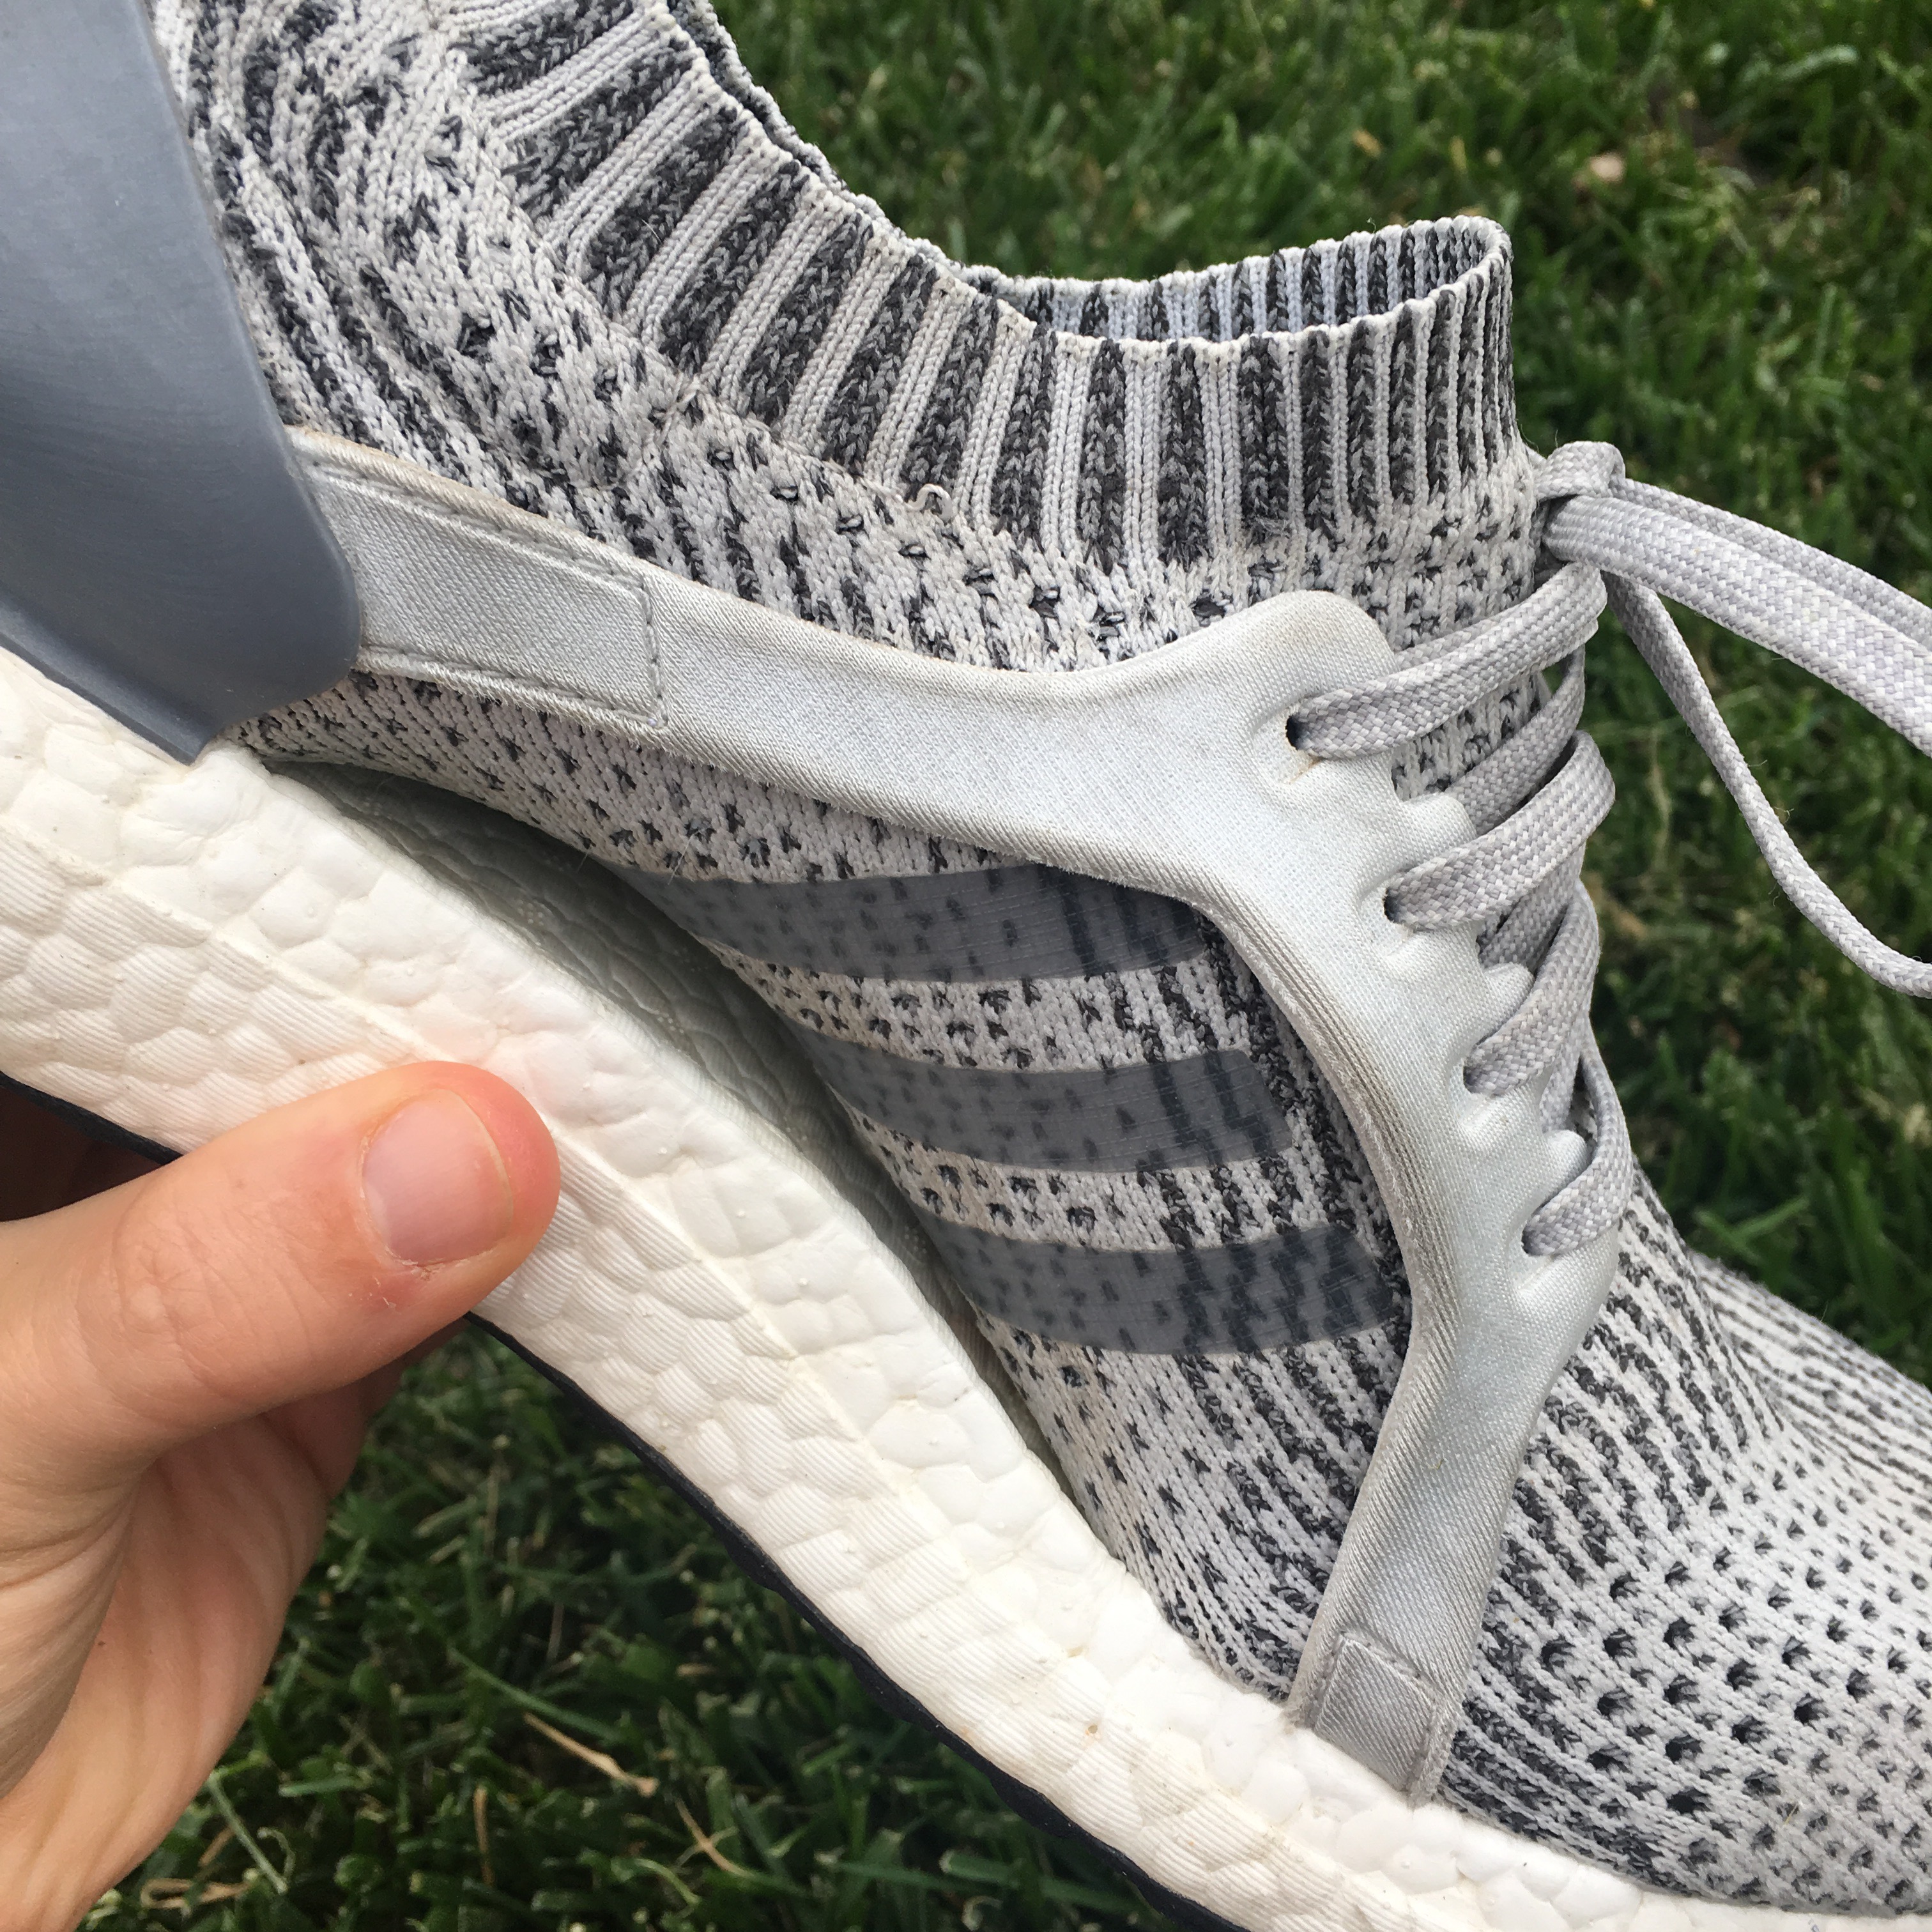 hickies ultra boost